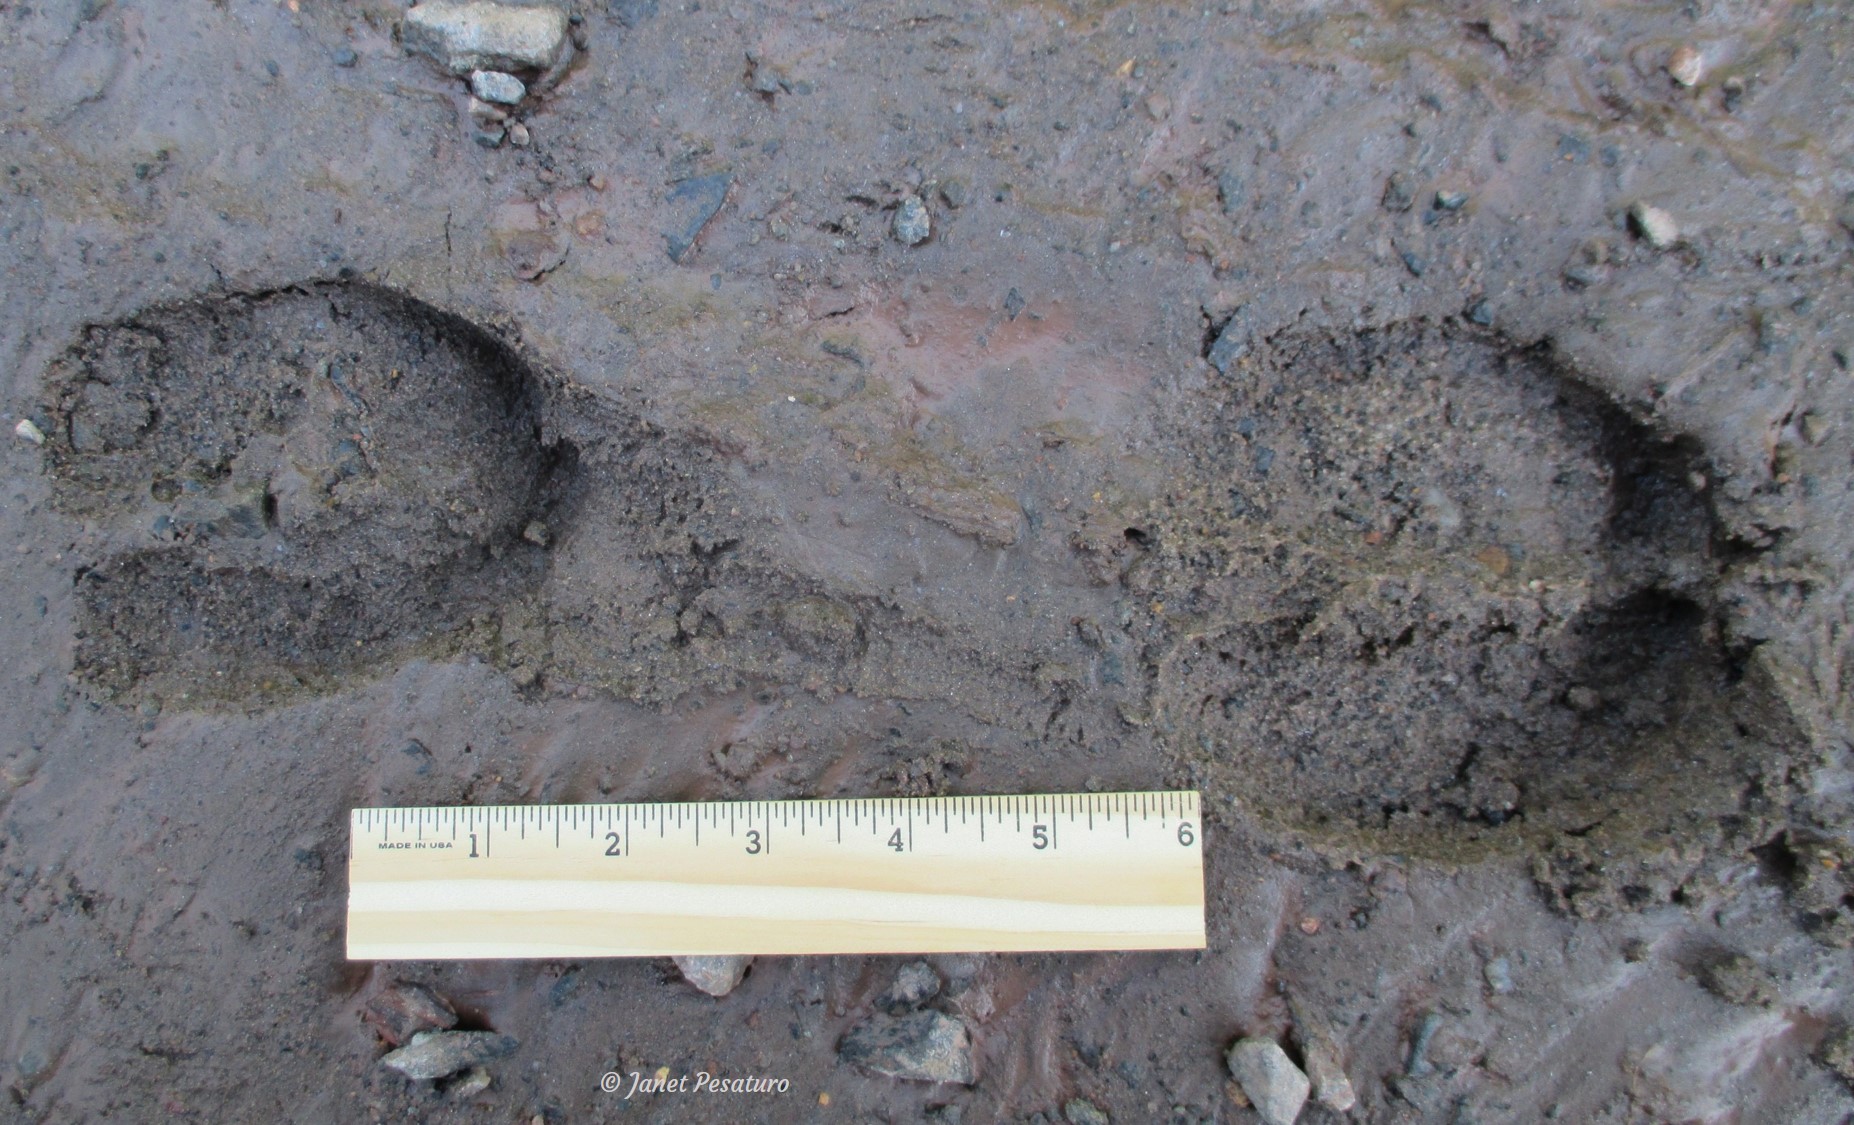 Elk tracks and sign: Front and hind elk tracks. The larger, rounder front track is on the right.